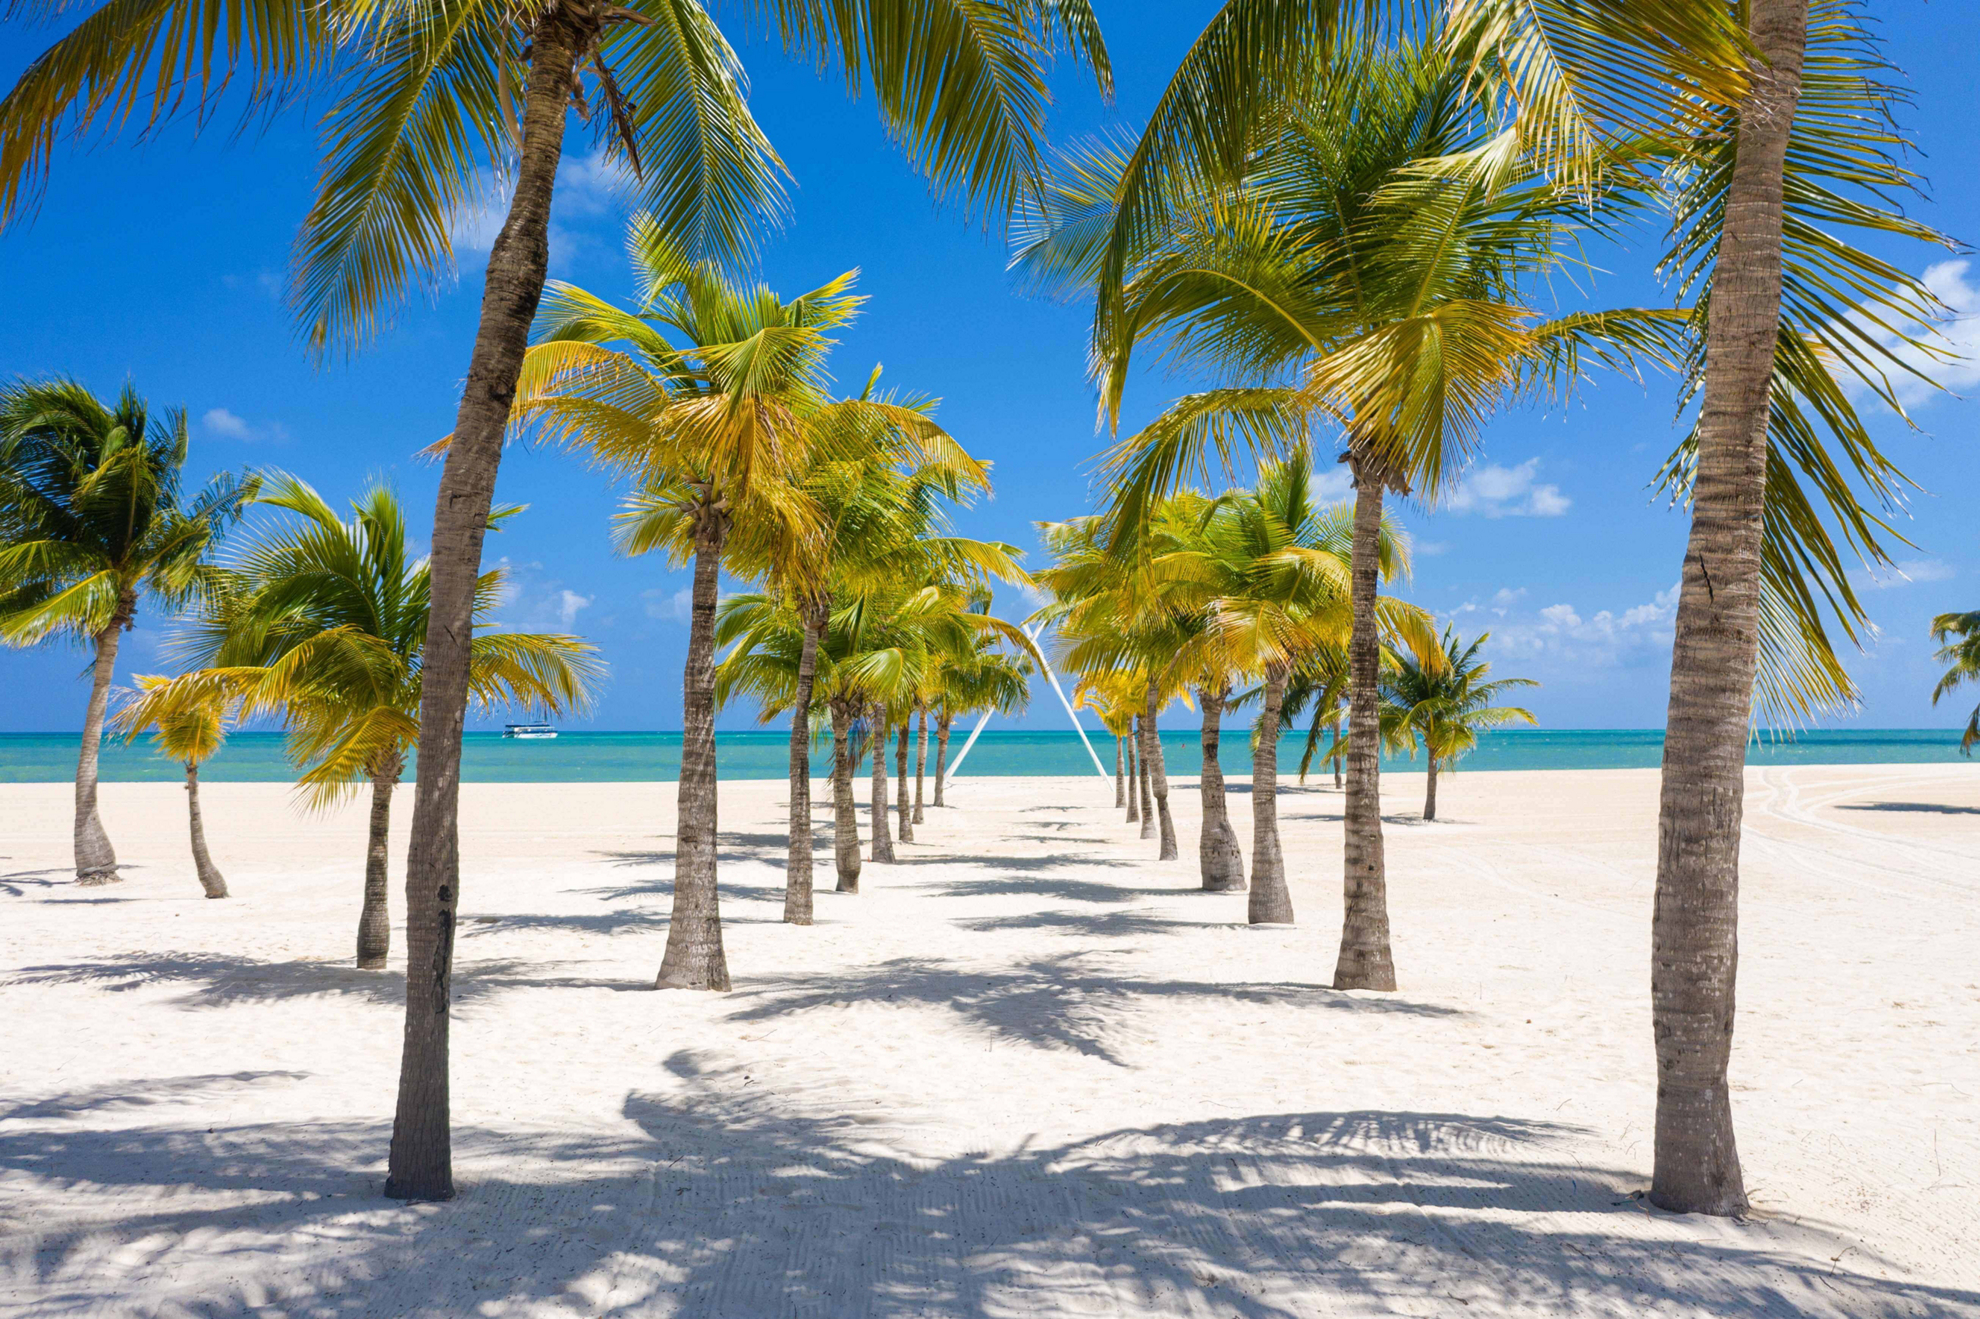 Romantic things to do in Cozumel: White sand, palm tree lined beach with turquoise water